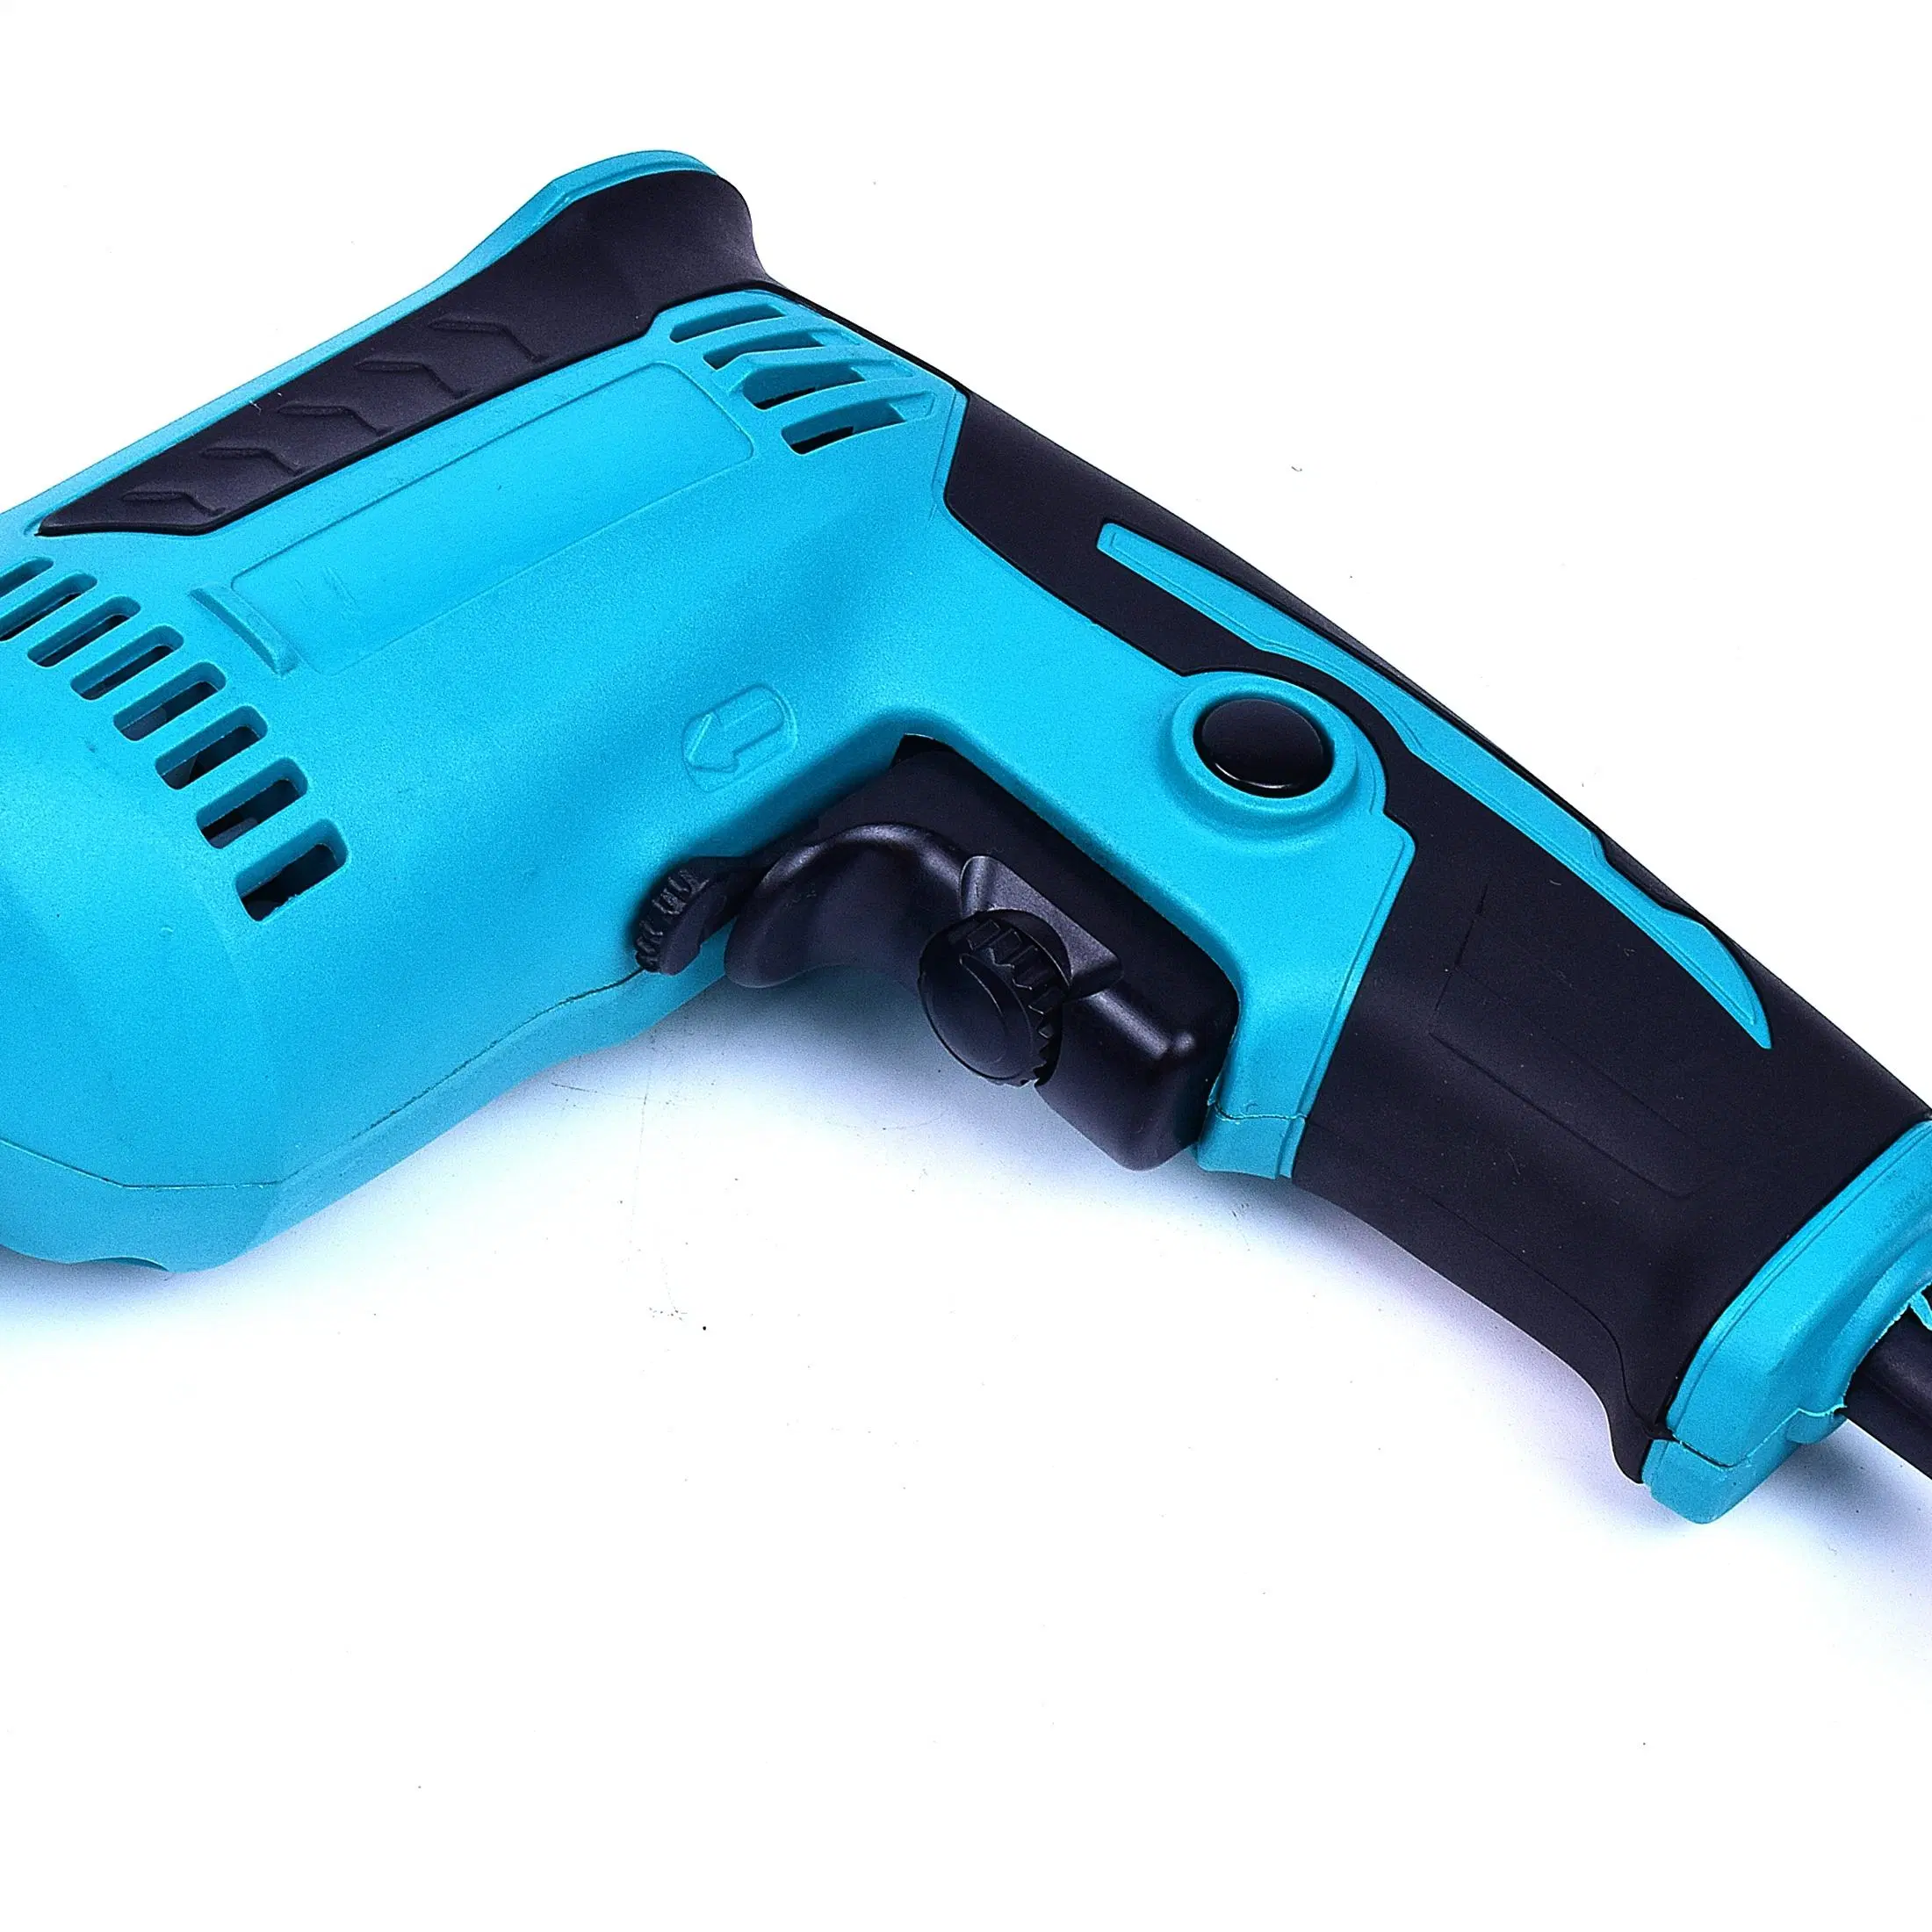 450W Impact Drill Electric Tool